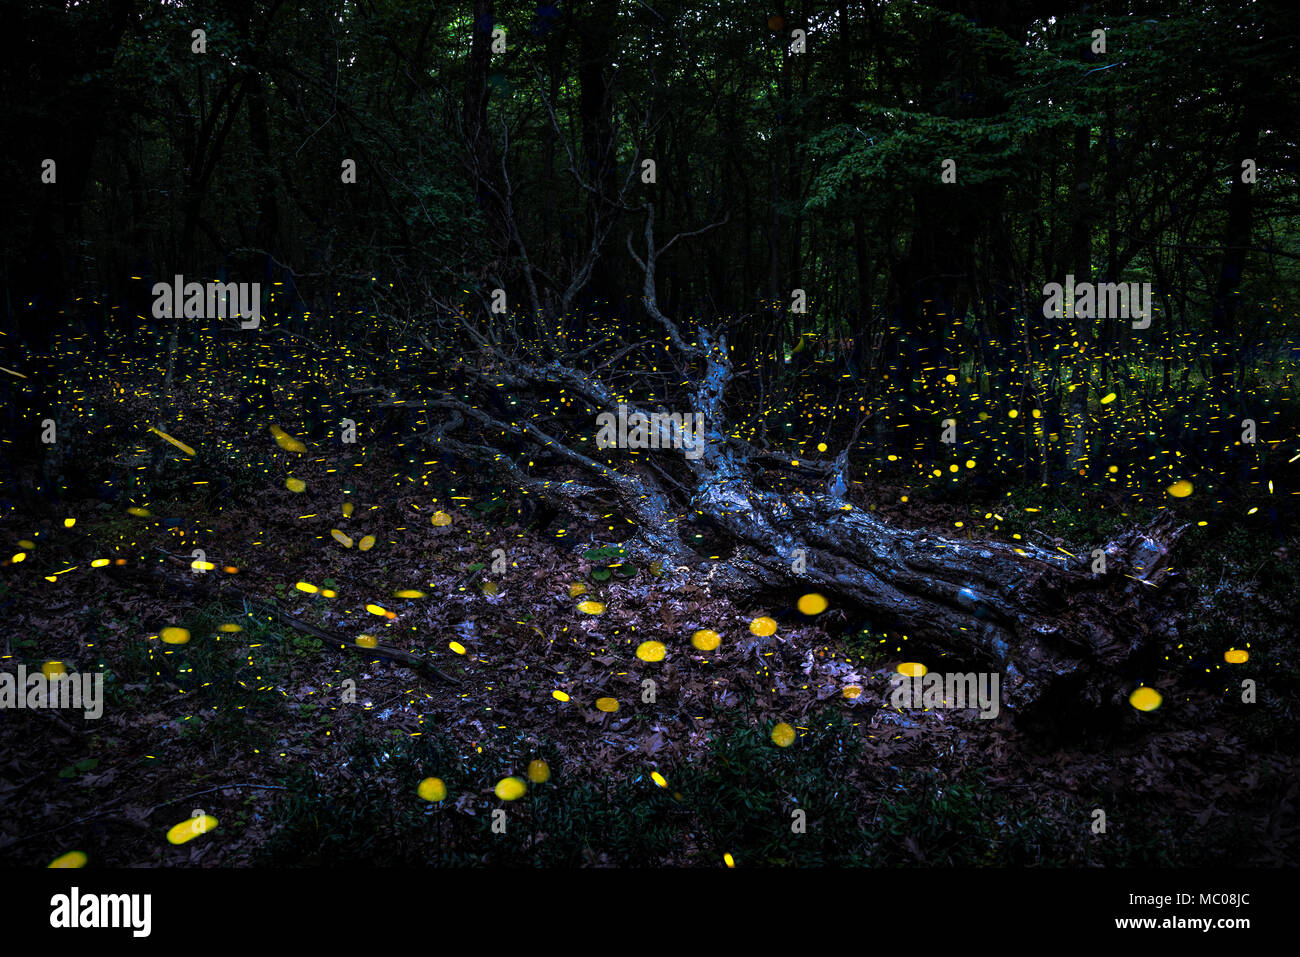 Frireflies flying around a fallen tree in the forest at dusk. Stock Photo